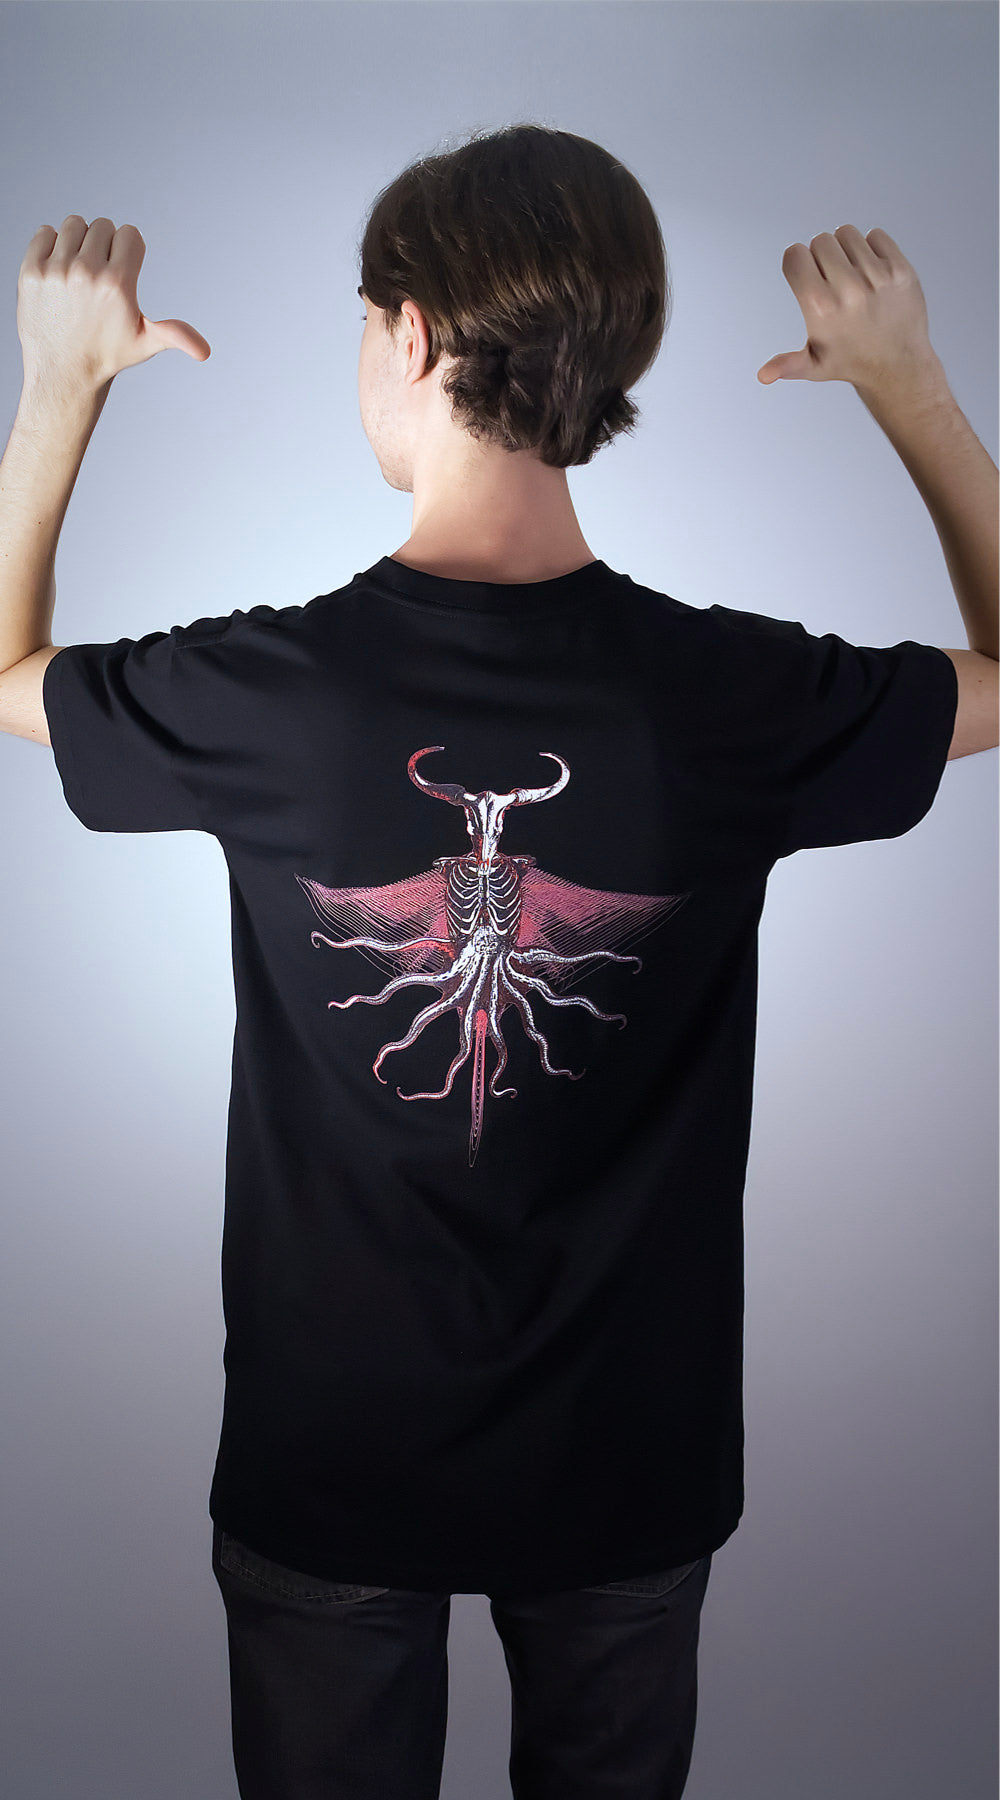 Men's black limited edition Art-Shirt 'OctoBeast' by Steven Fellowes, GOTS certified organic cotton, back view